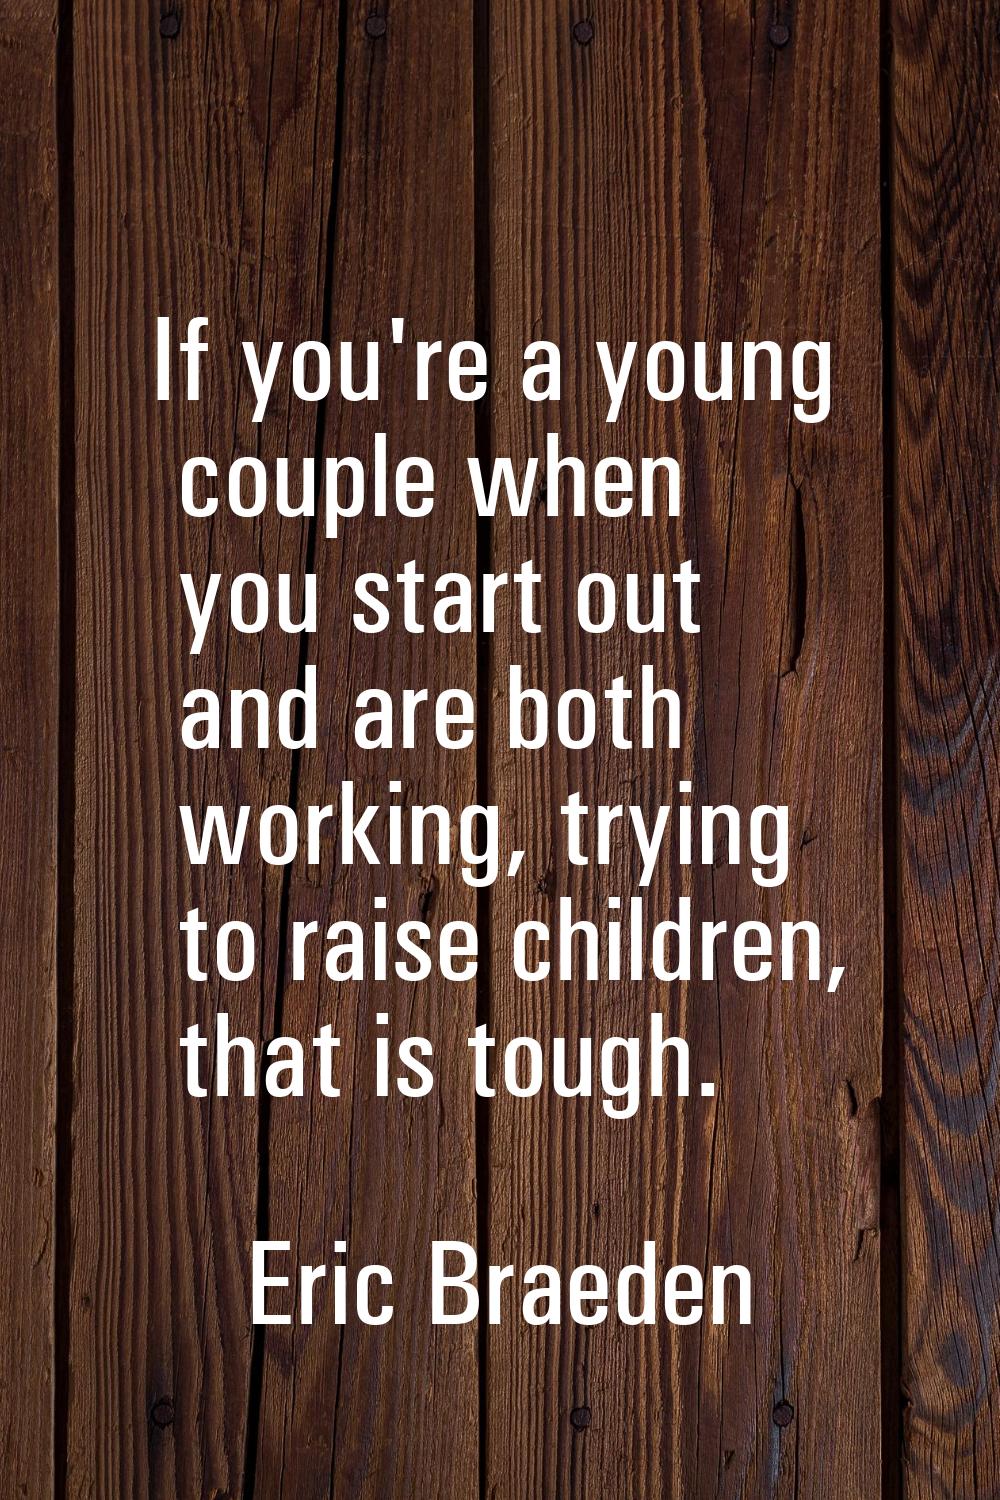 If you're a young couple when you start out and are both working, trying to raise children, that is